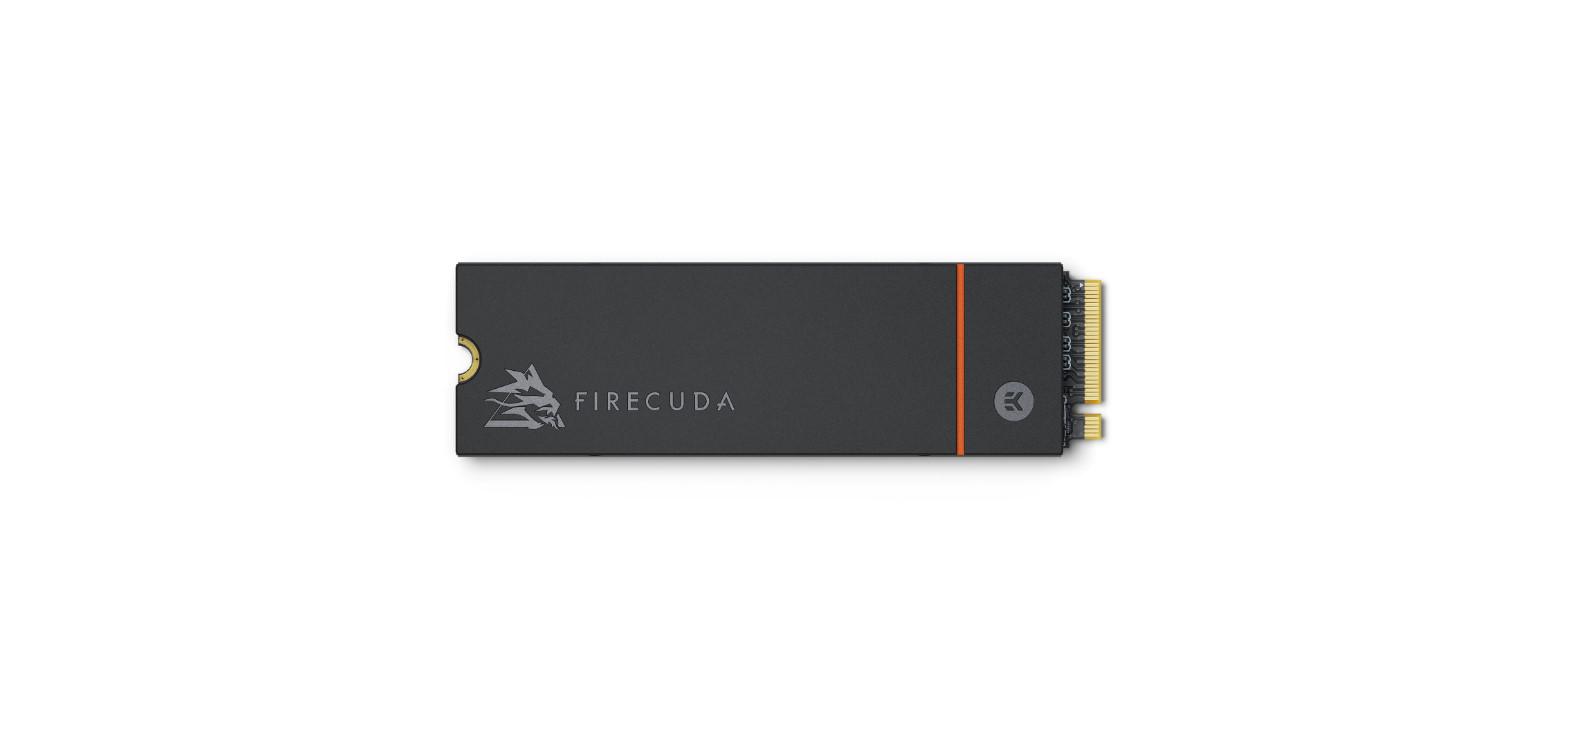 SSD Seagate FIRECUDA 530, 4TB, M.2-2280 with heatsink, PCIe Gen4 x4 NVMe 1.4, R/W speed: up to 7300/6900MB/s